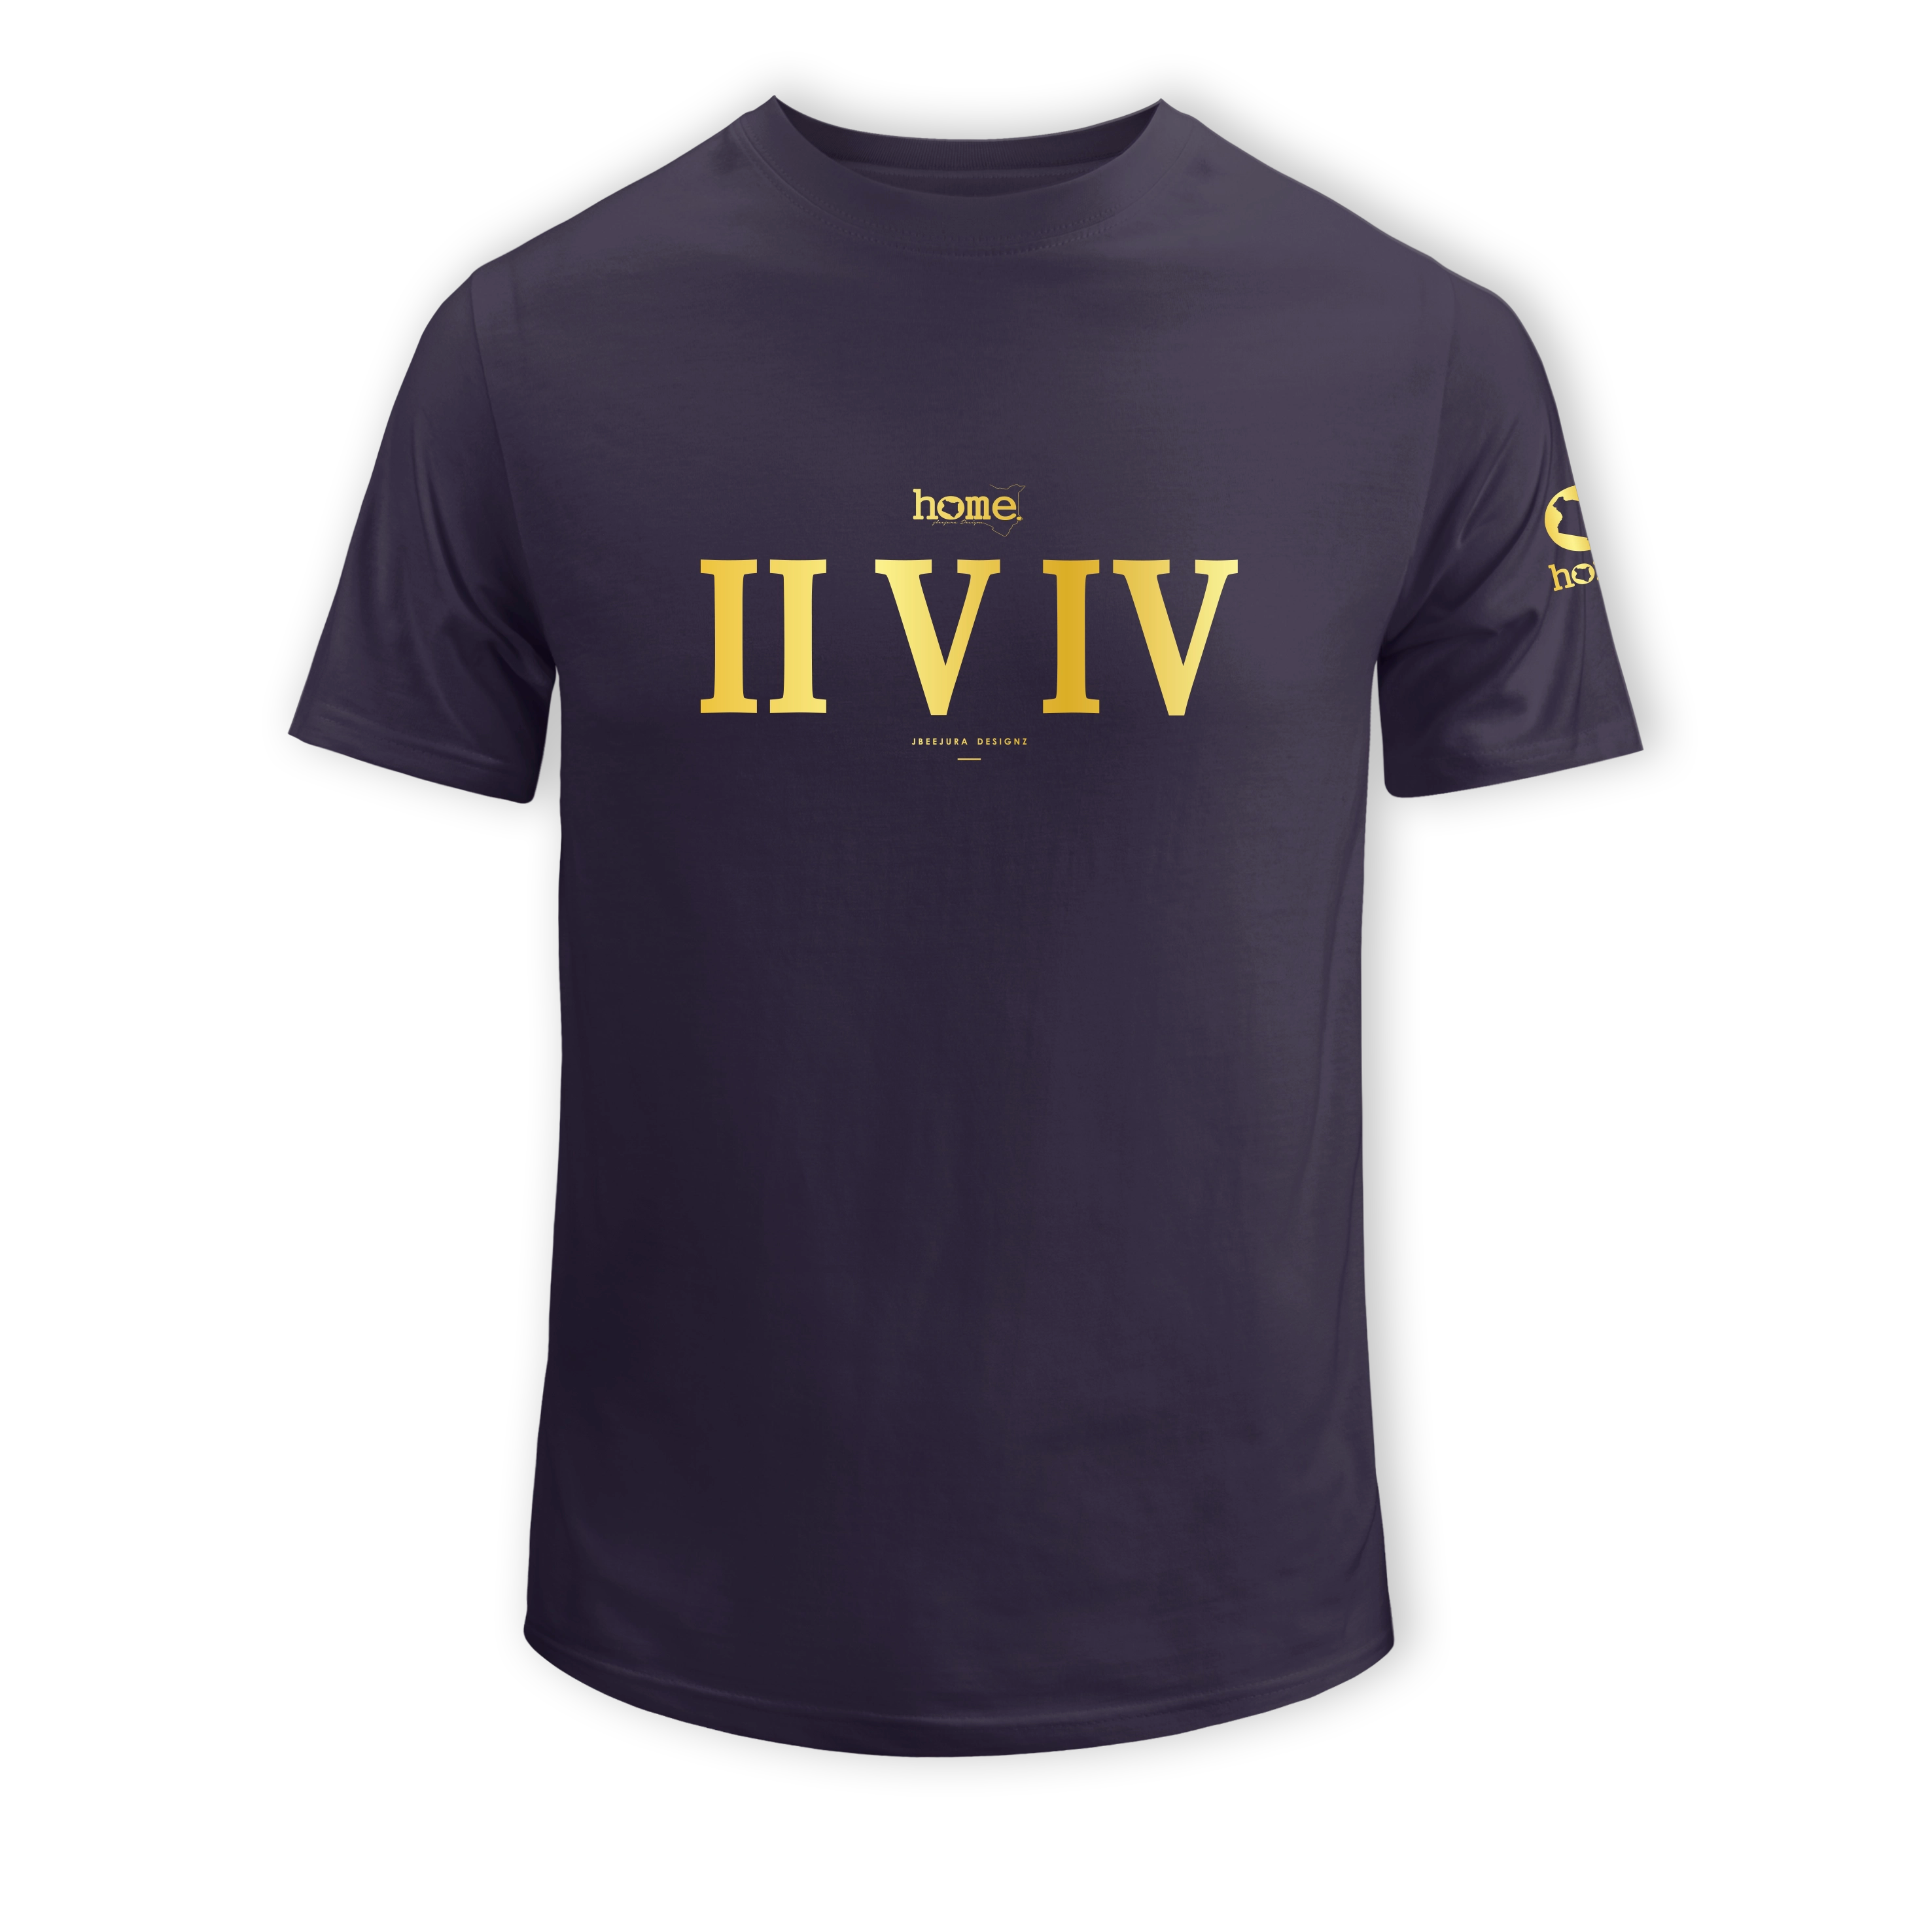 home_254 KIDS SHORT-SLEEVED RICH PURPLE T-SHIRT WITH A GOLD ROMAN NUMERALS PRINT – COTTON PLUS FABRIC